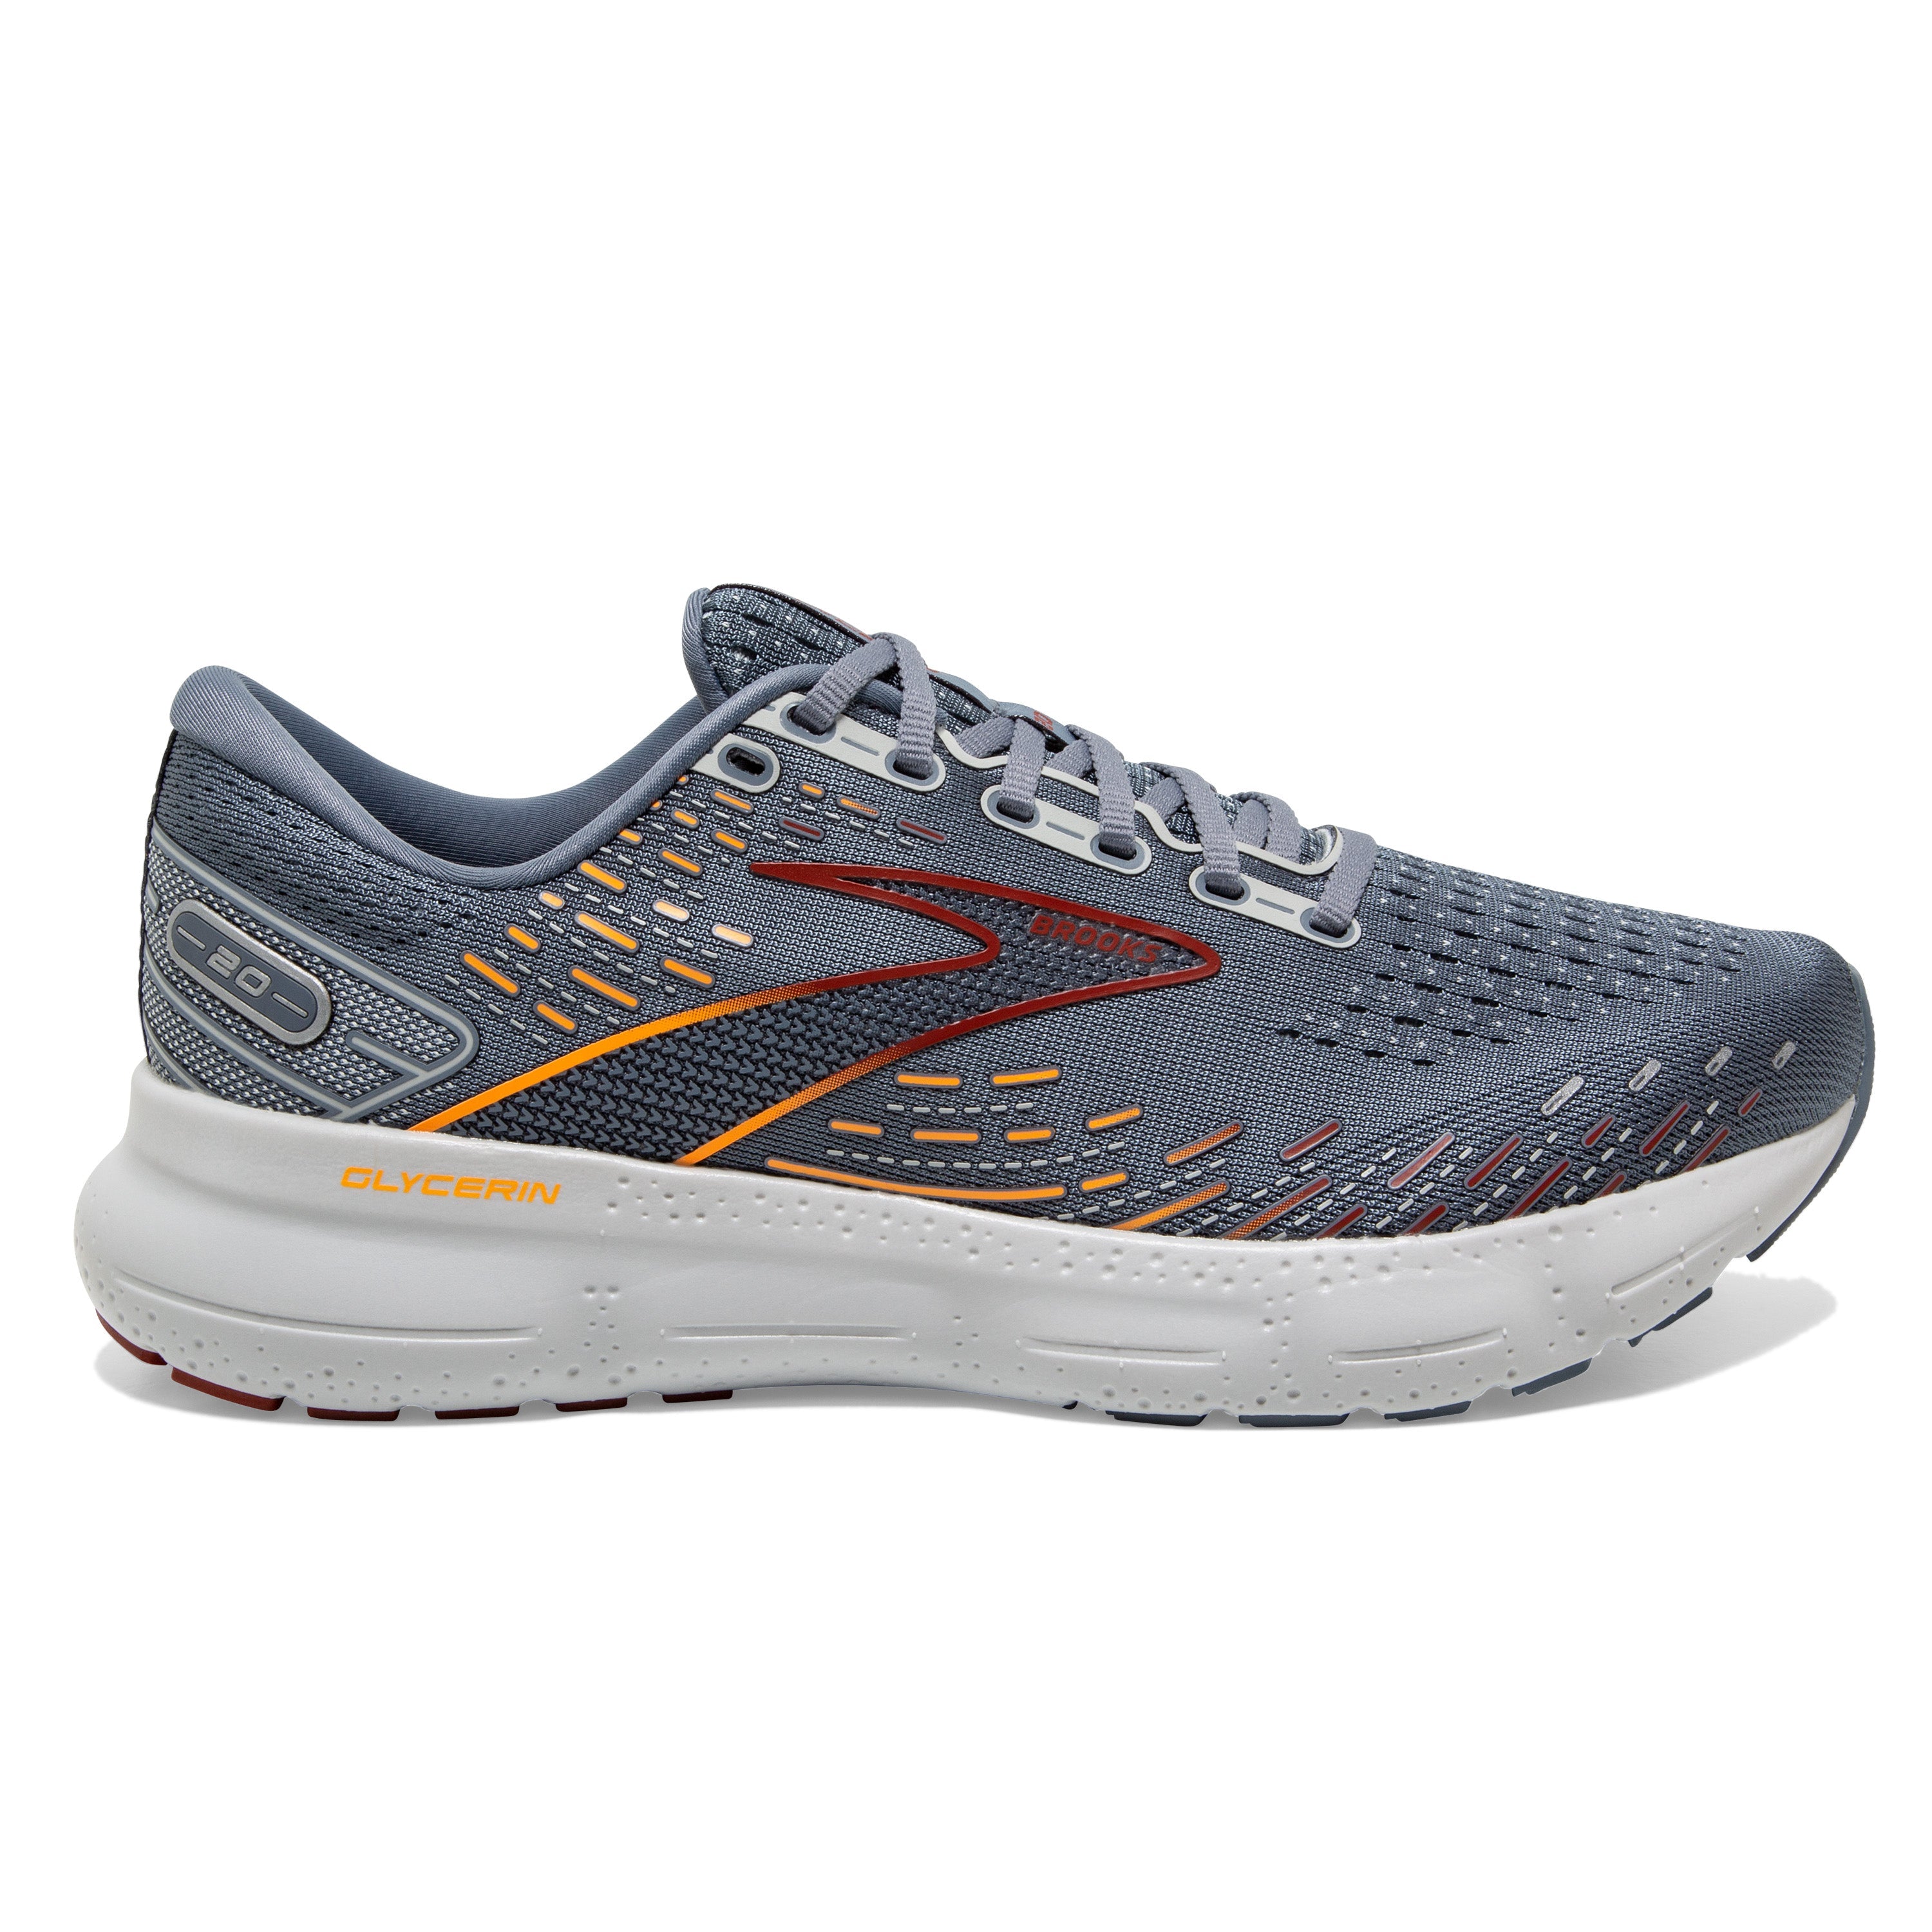 BROOKS Glycerin 19 Running Shoes For Men - Buy BROOKS Glycerin 19 Running  Shoes For Men Online at Best Price - Shop Online for Footwears in India